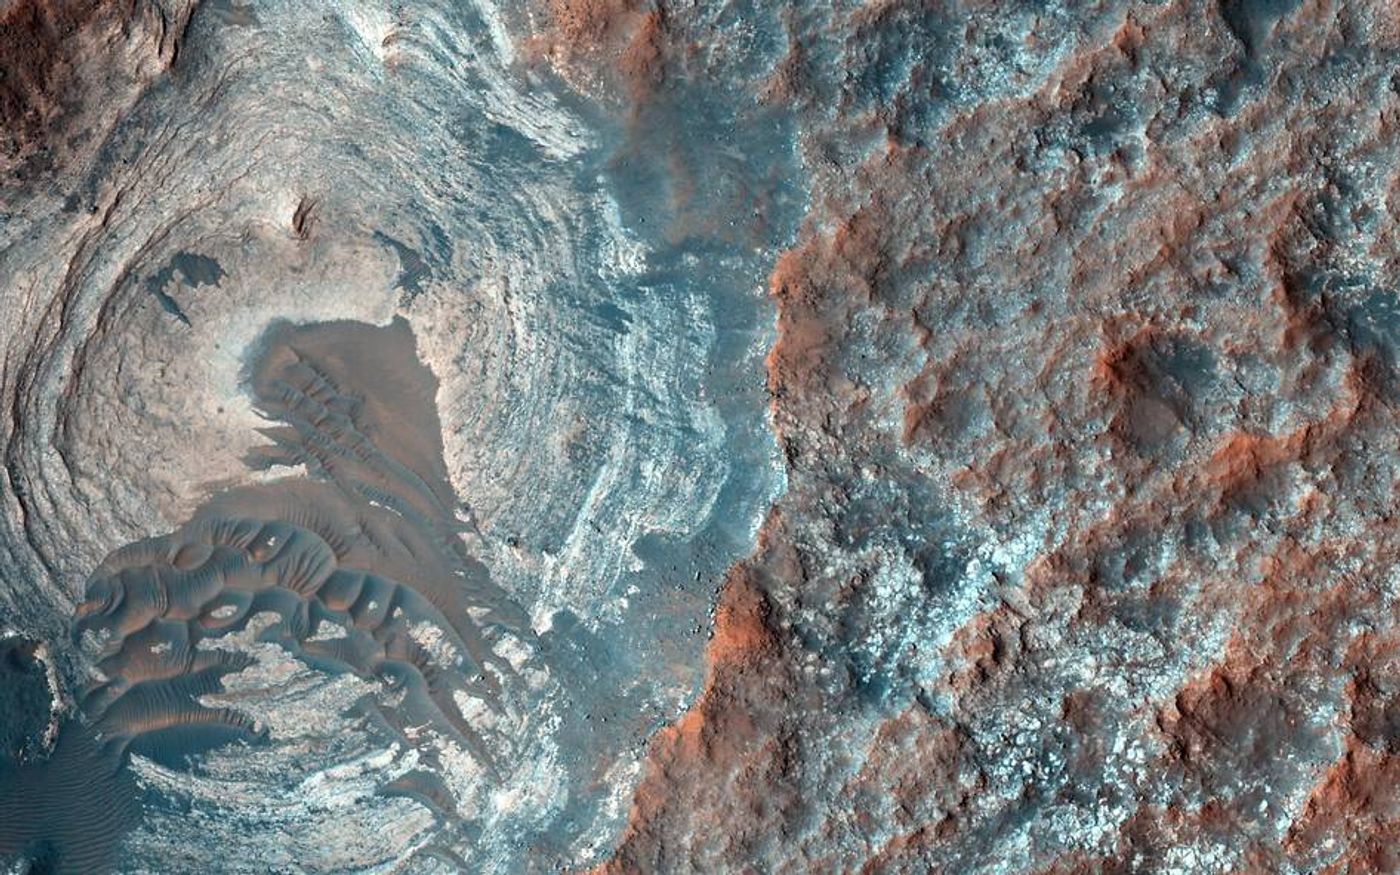 Dunes in a circular depression on Mars, taken by the Mars Reconnaissance Orbiter